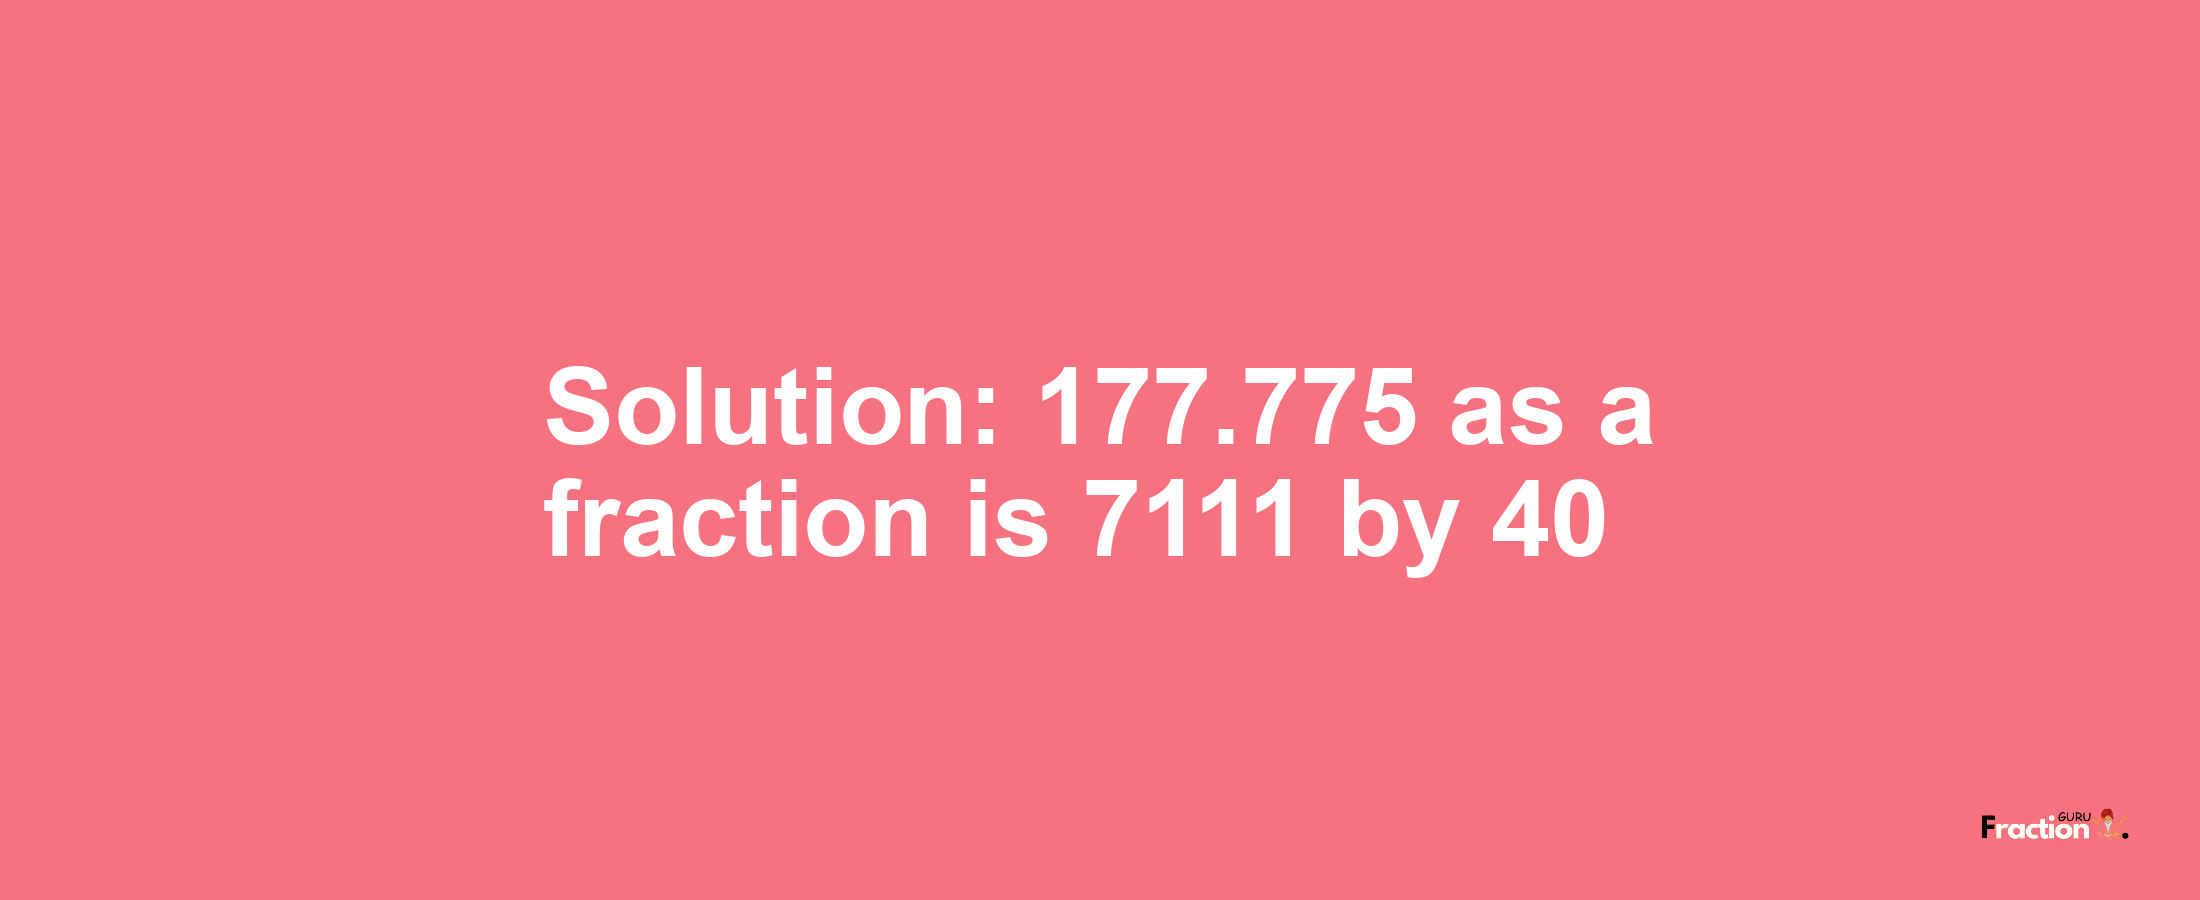 Solution:177.775 as a fraction is 7111/40